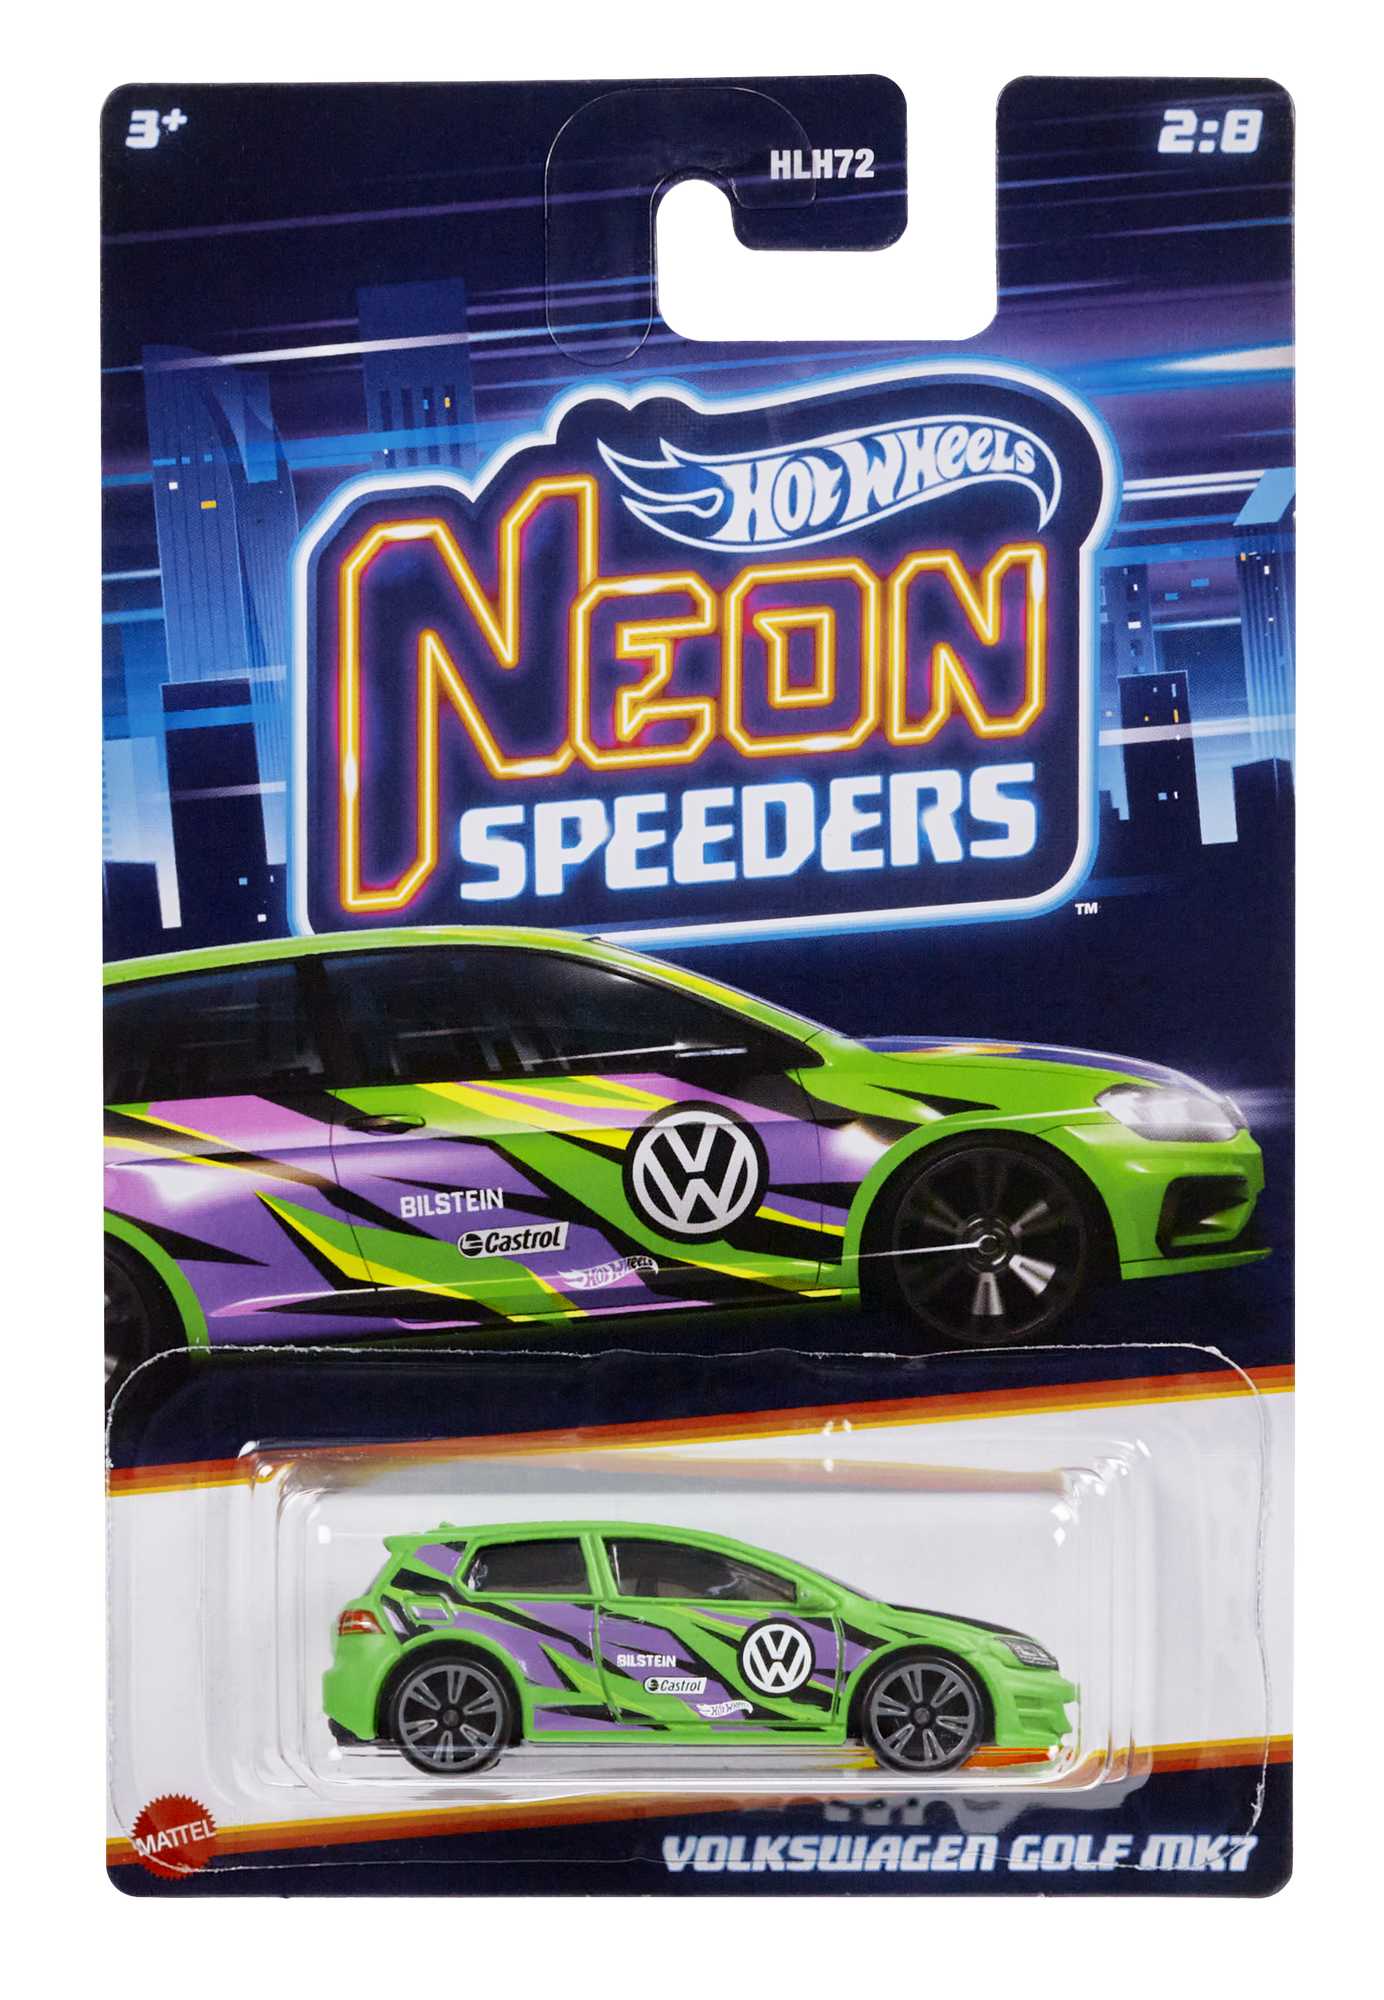 Hot Wheels Cars, Neon Speeders, 1 Die-Cast Toy Car in 1:64 Scale with Neon Designs - image 5 of 6